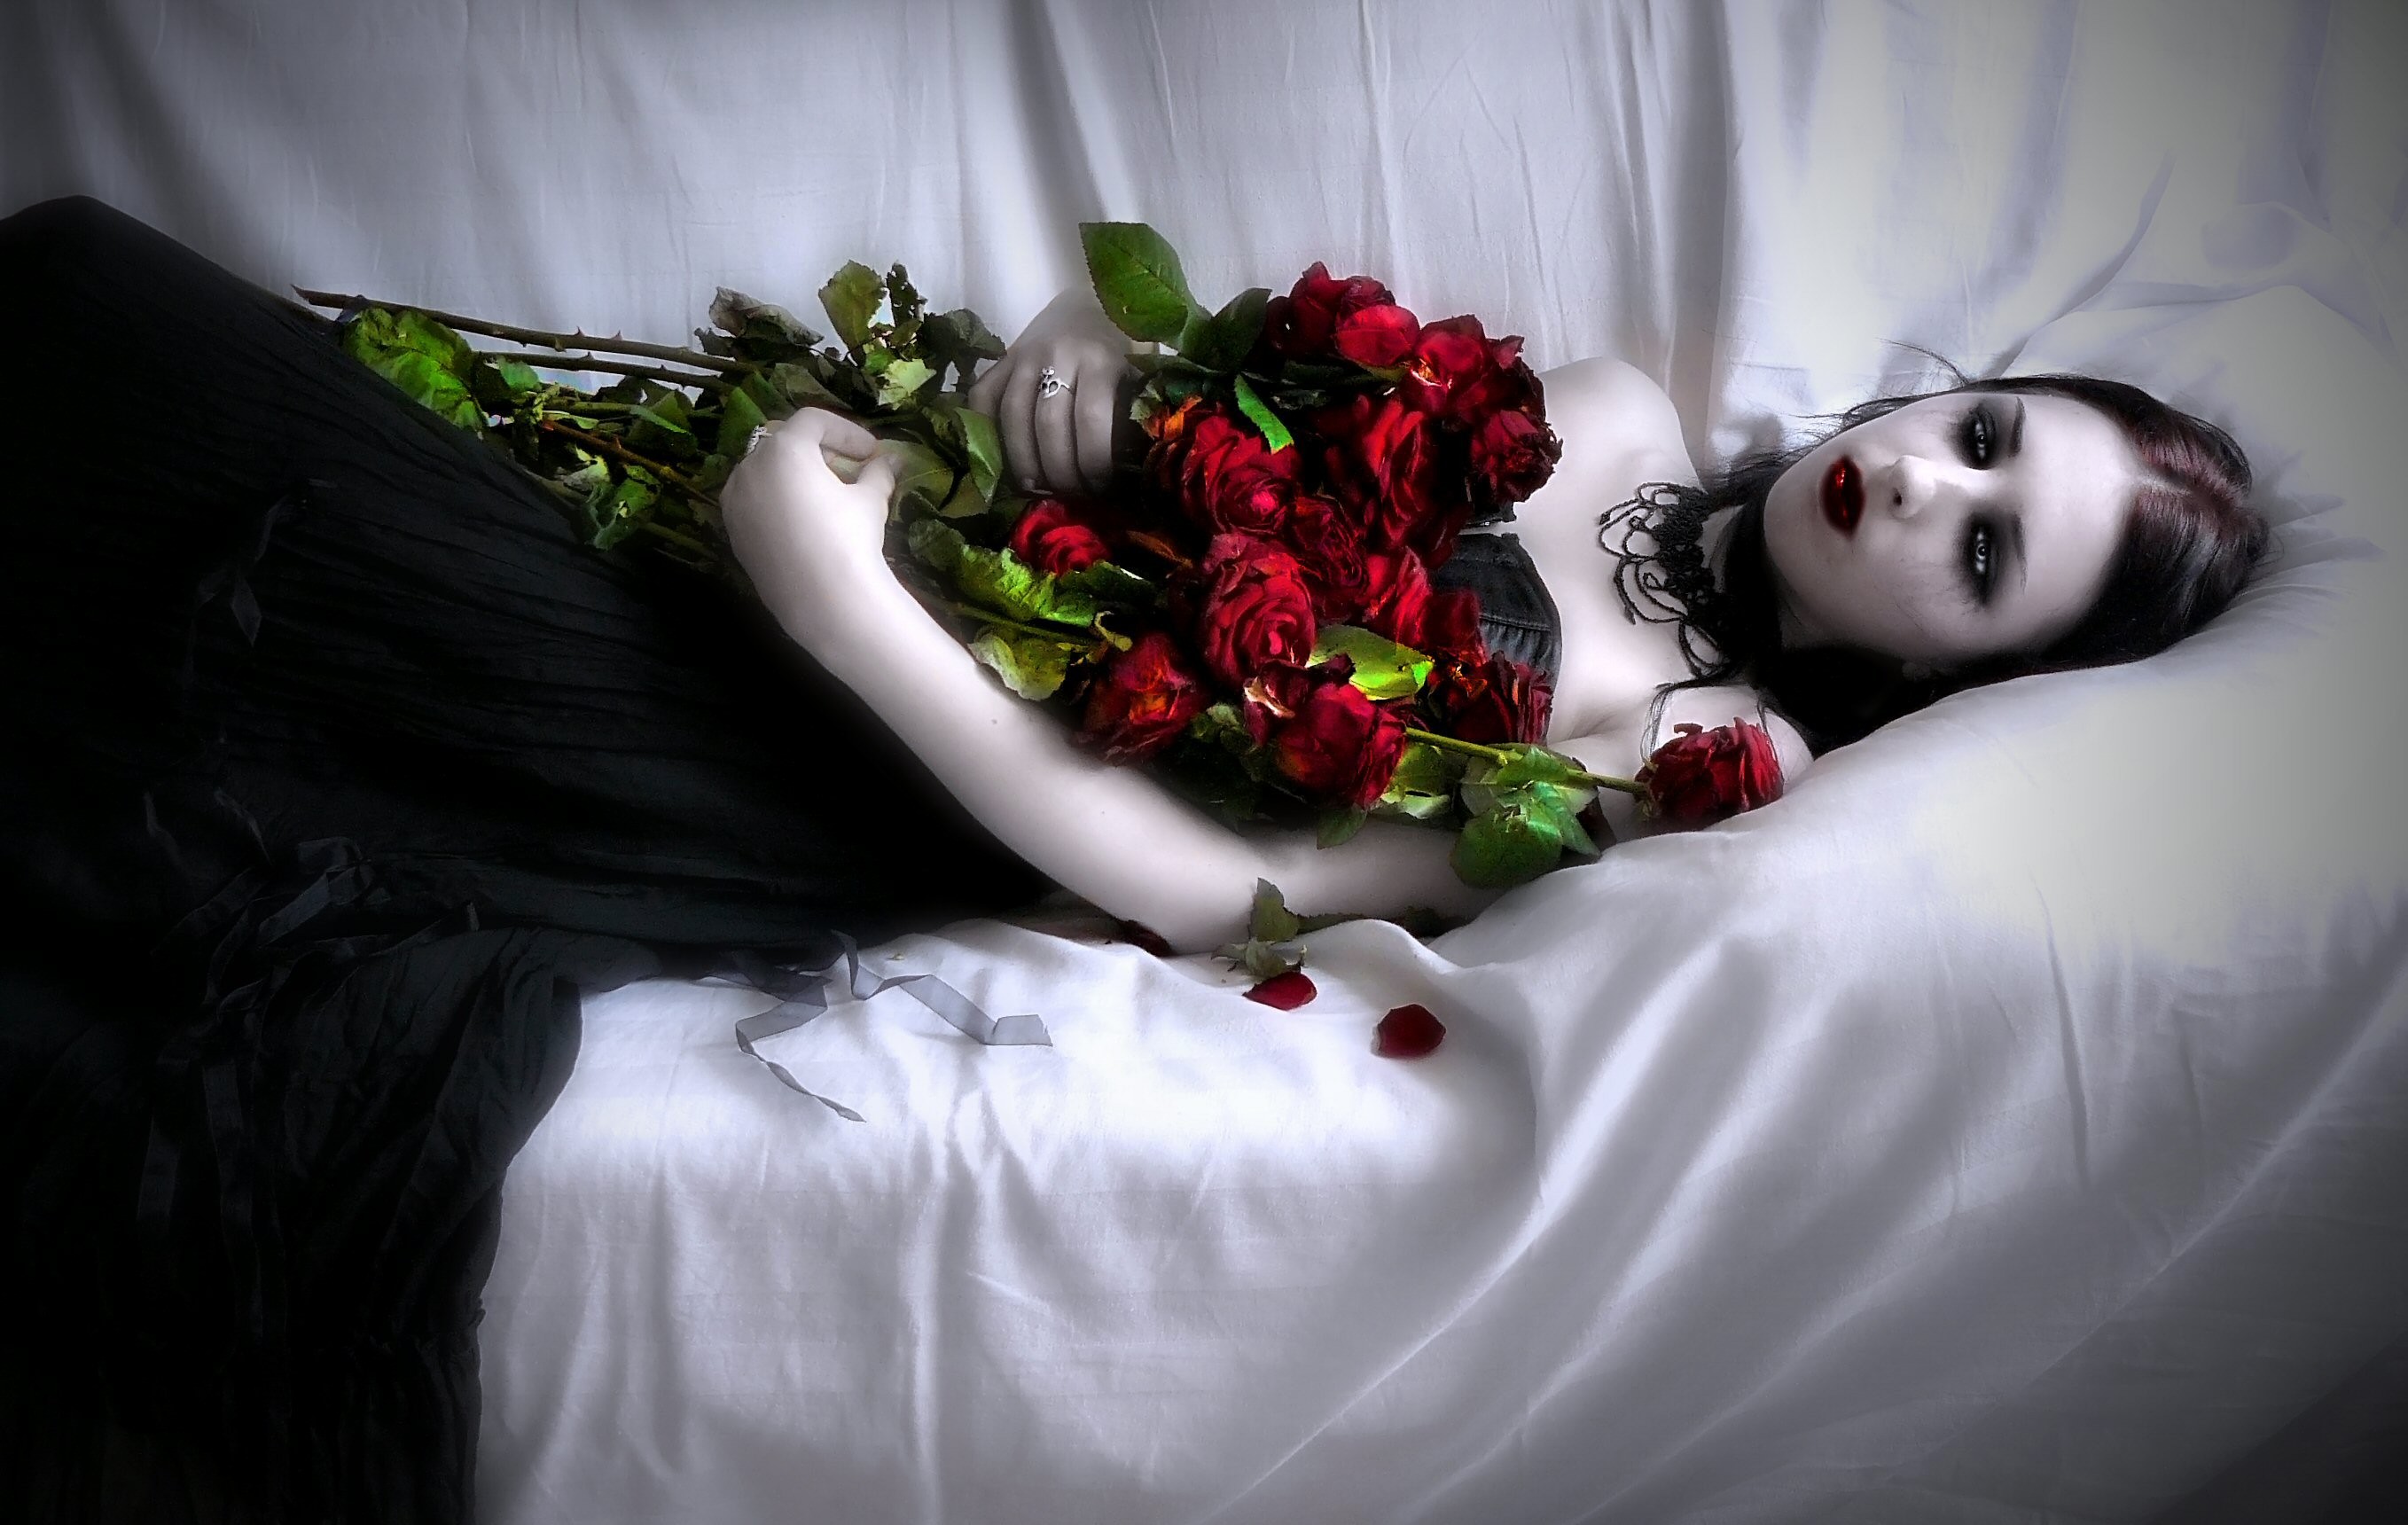 Vampire Arina with roses wallpaper from Vampire wallpapers